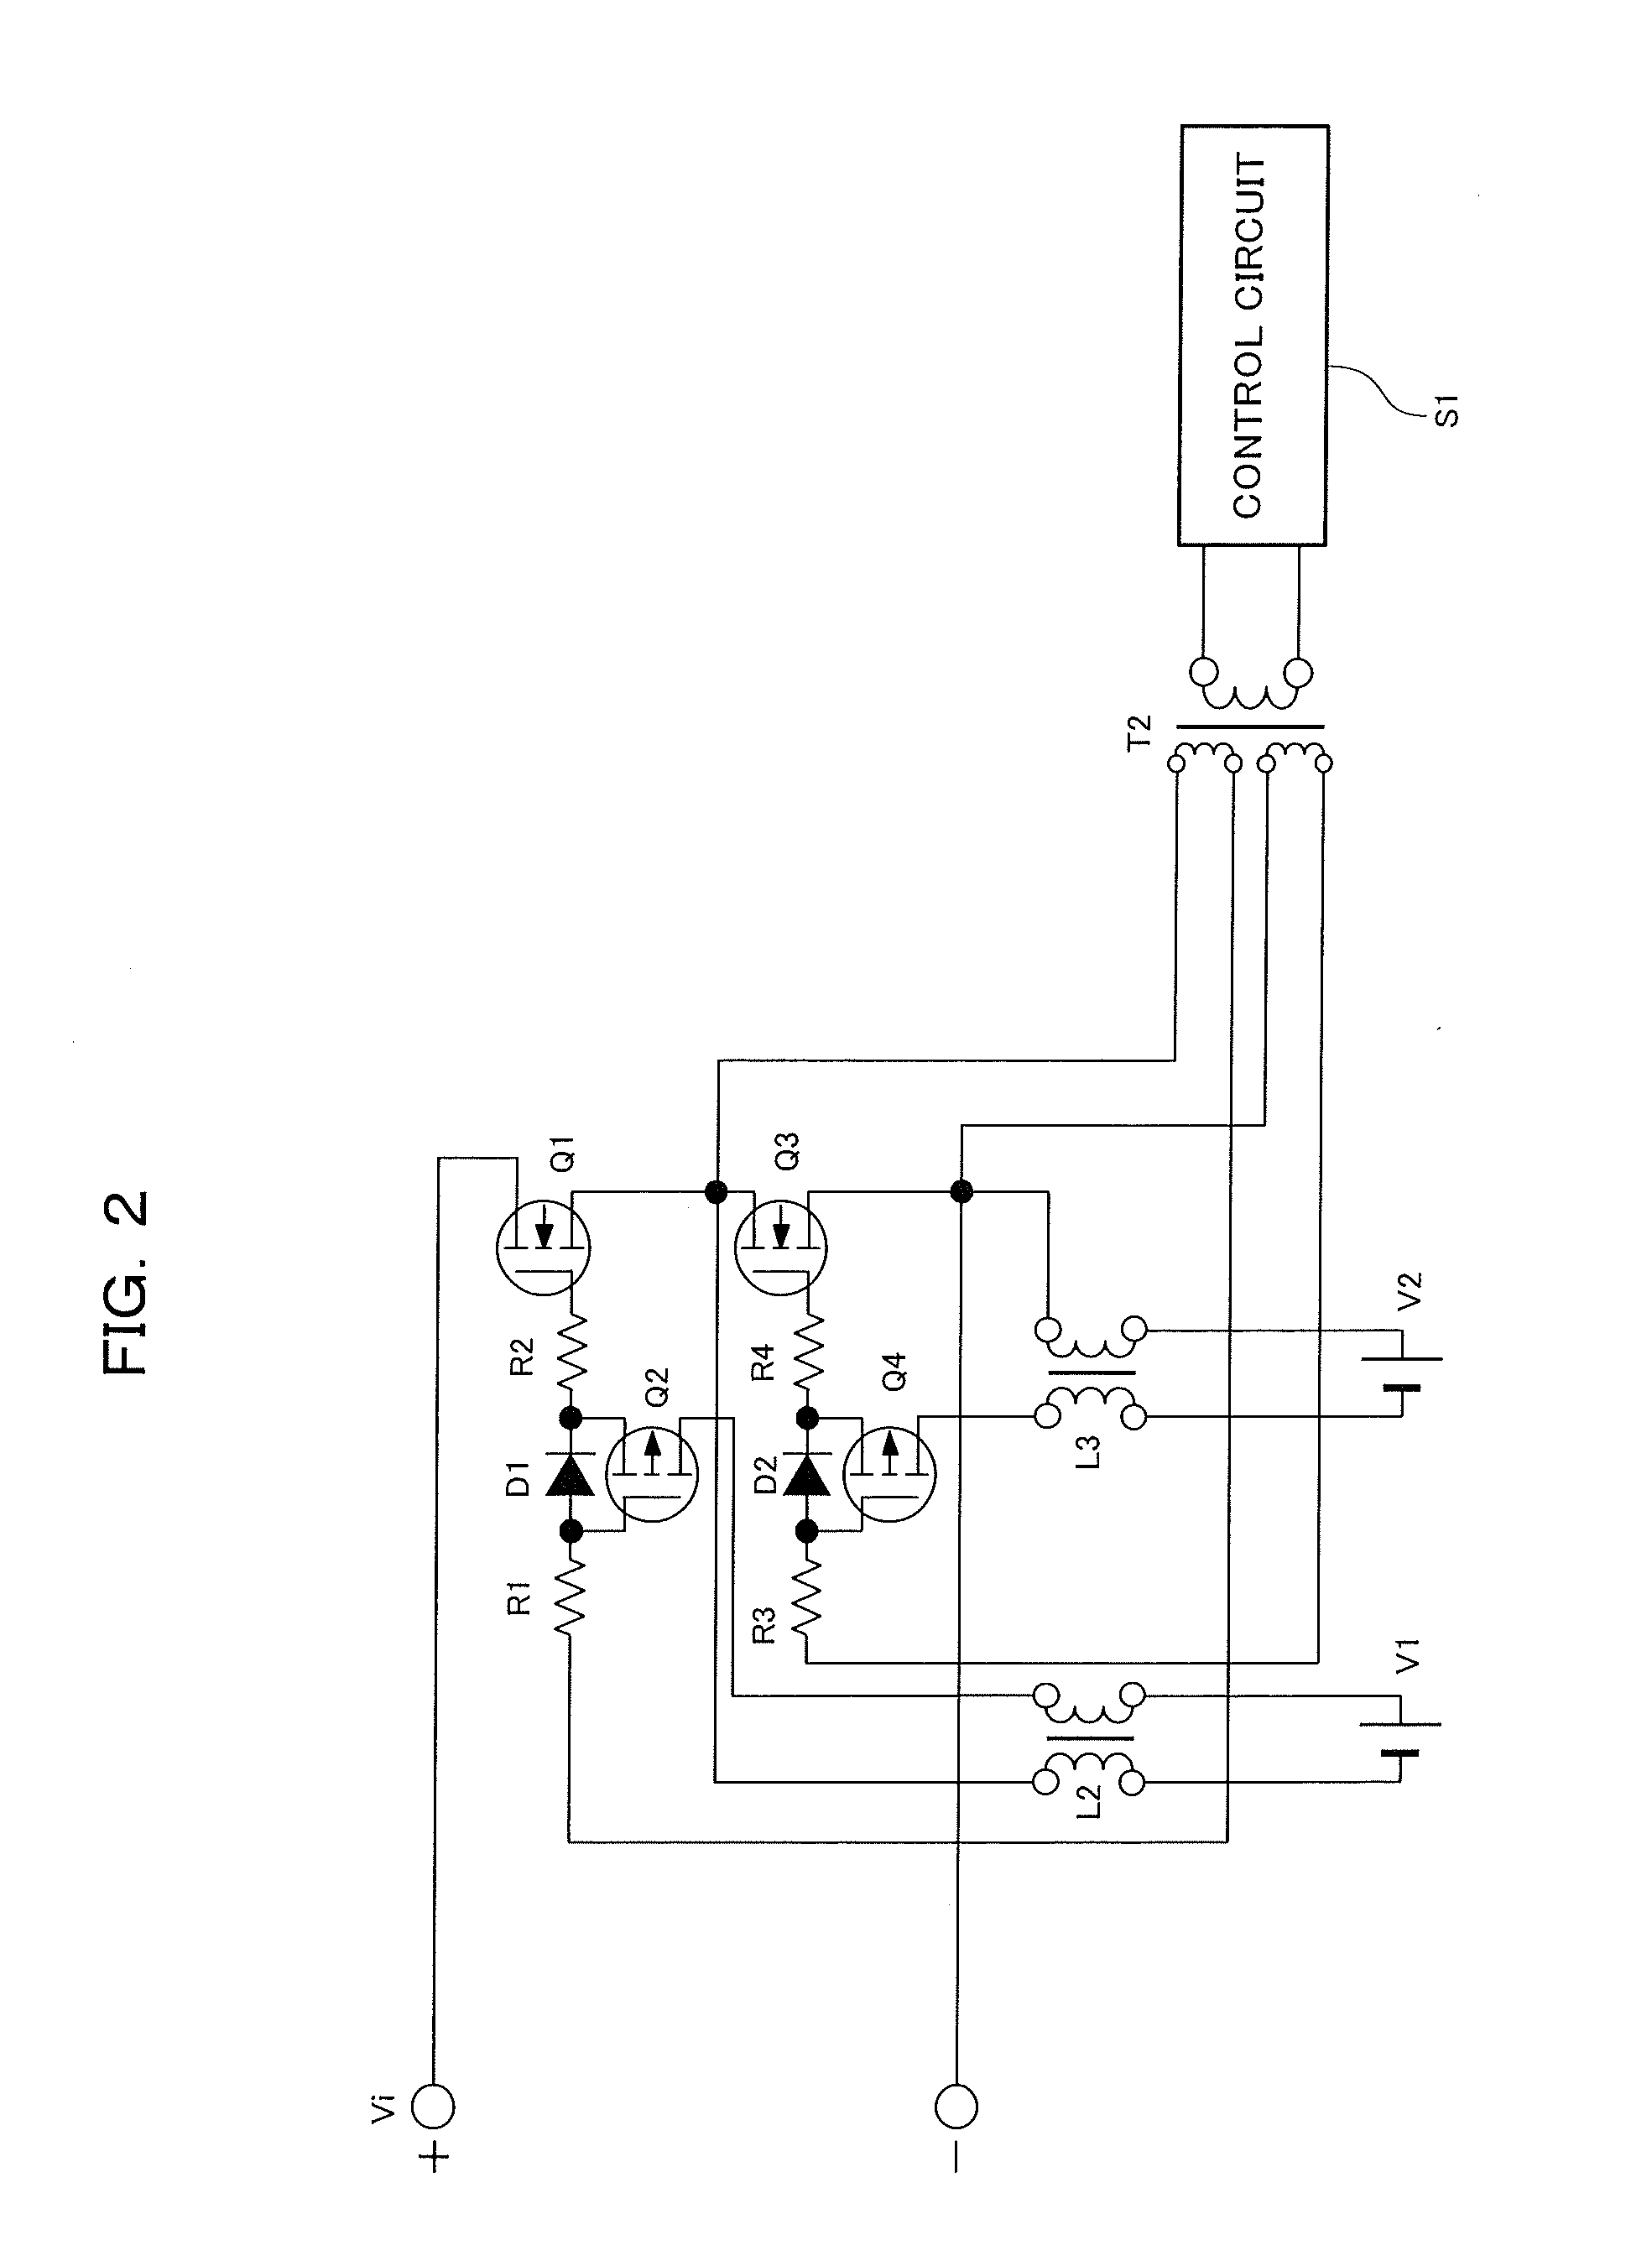 Switching power supply with plural resonant converters and variable frequency